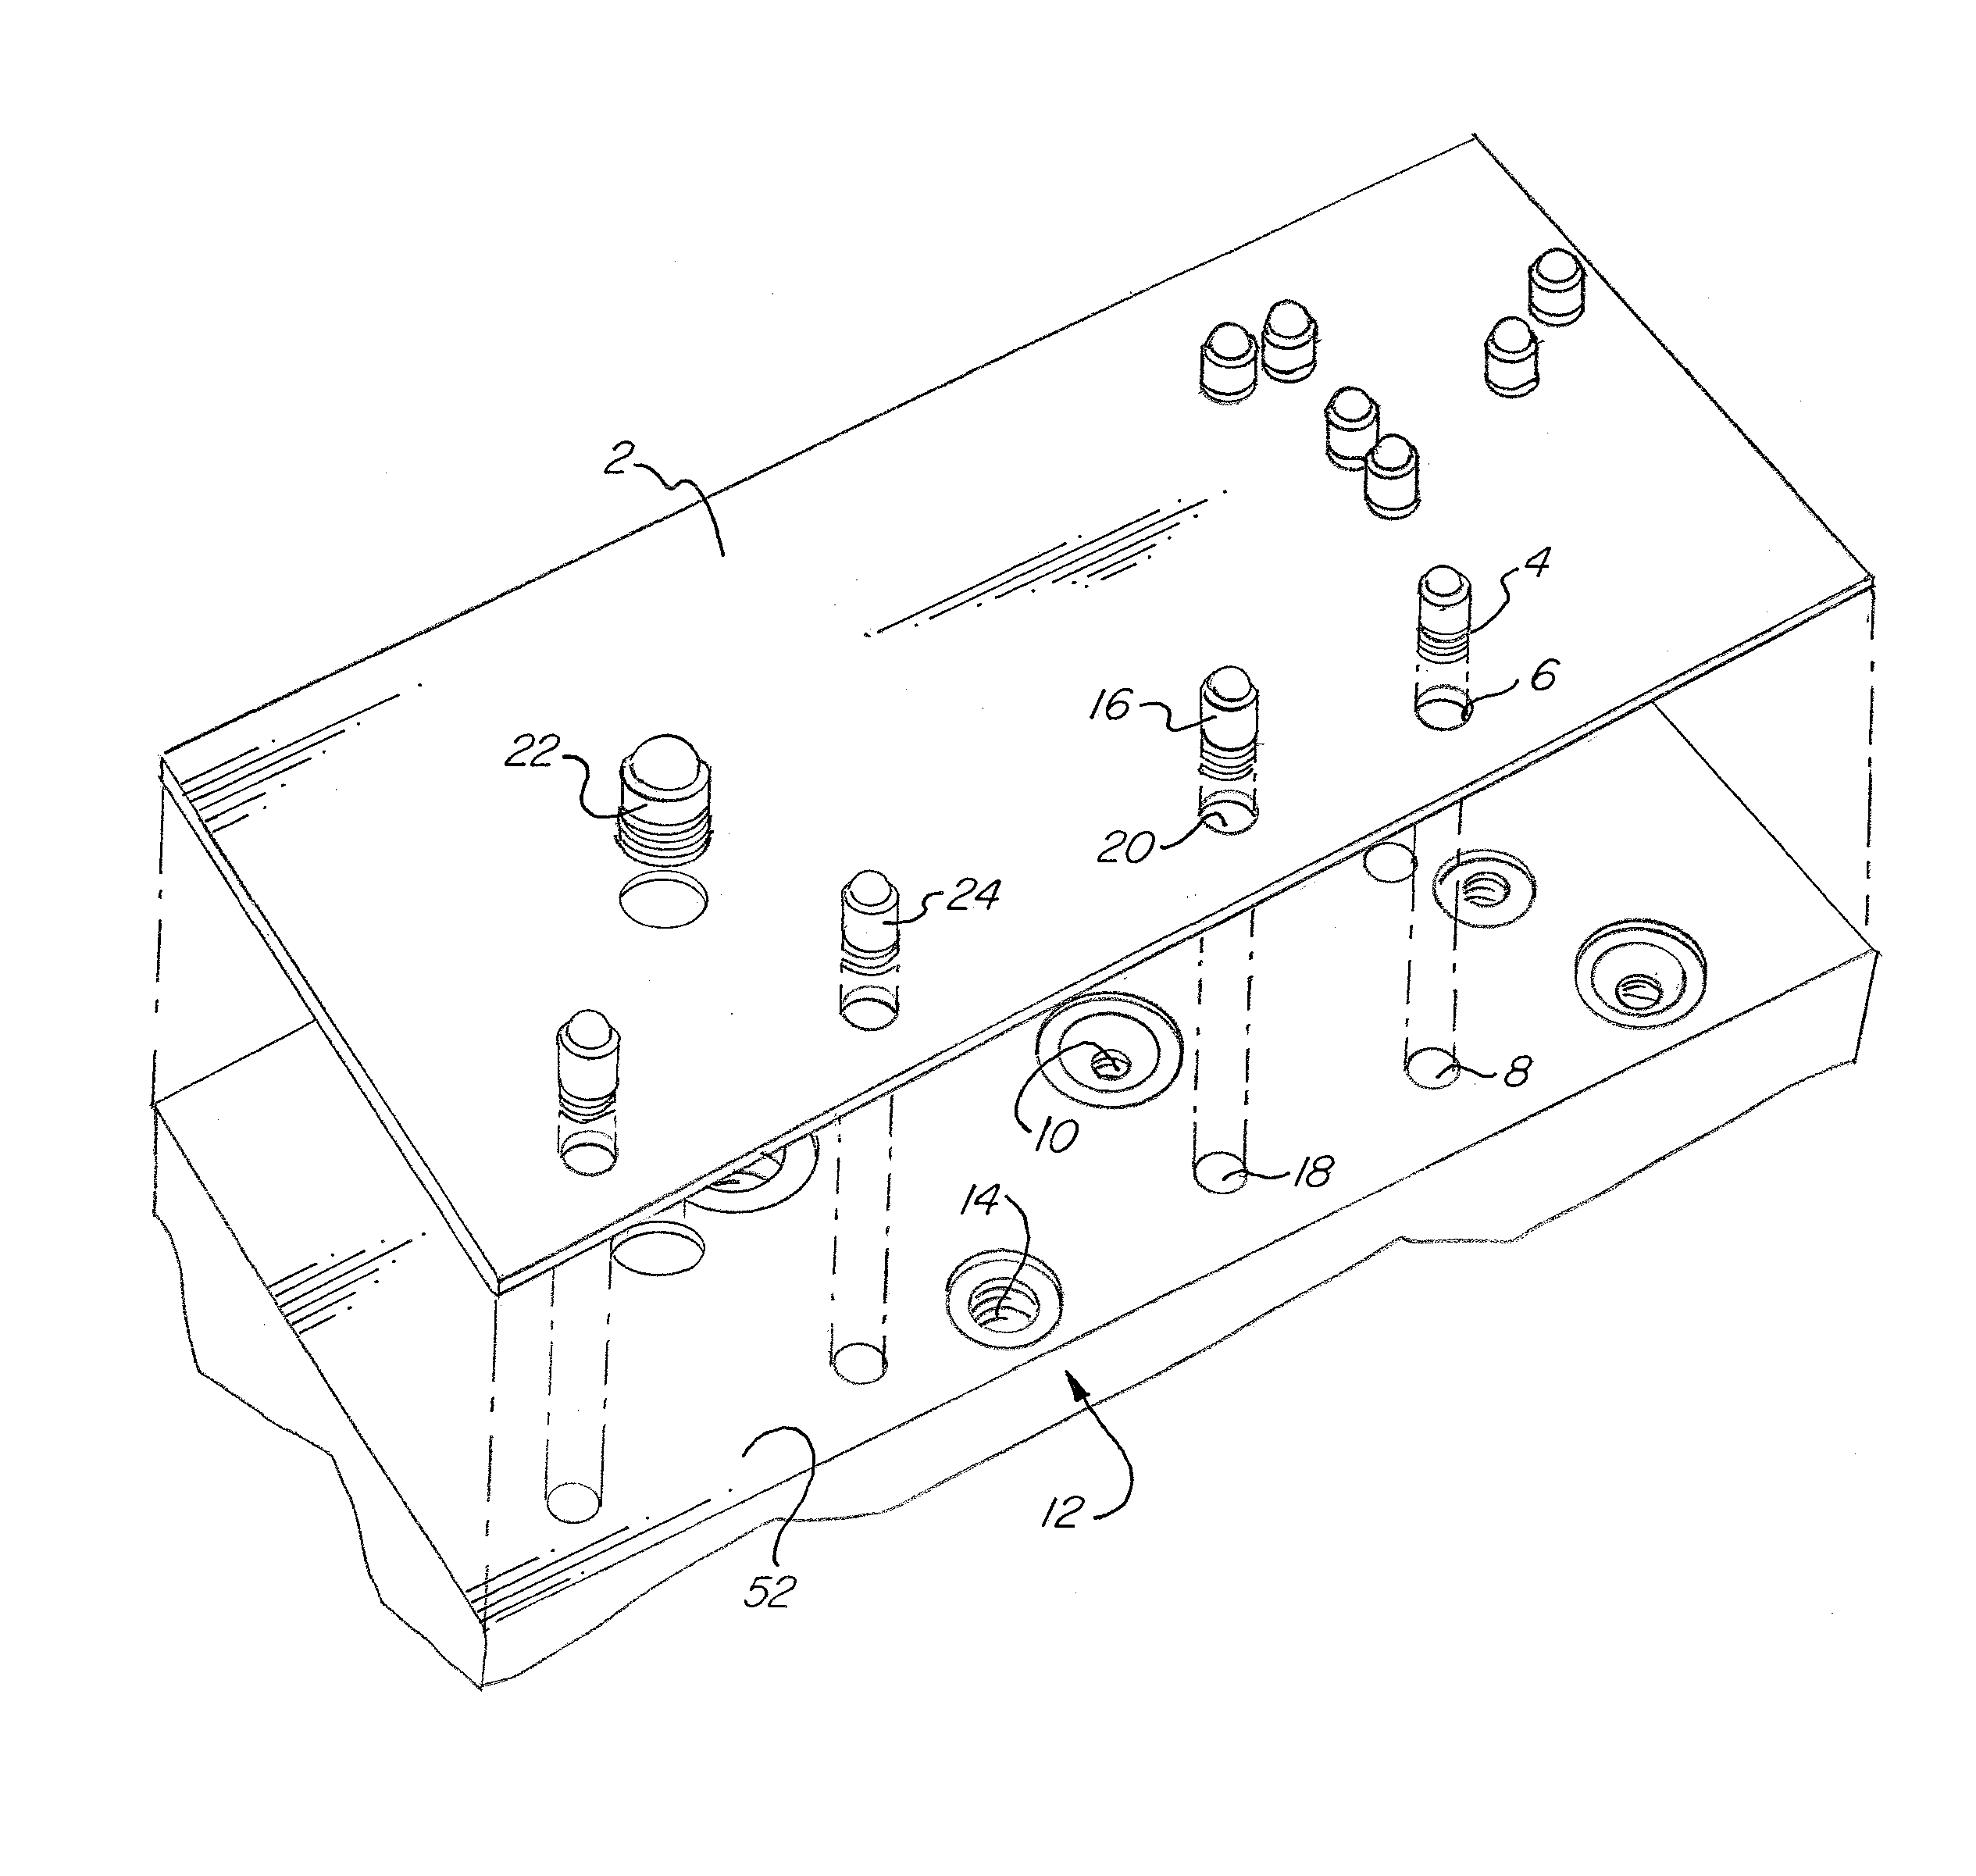 Insert Alignment and Installation Devices and Methods